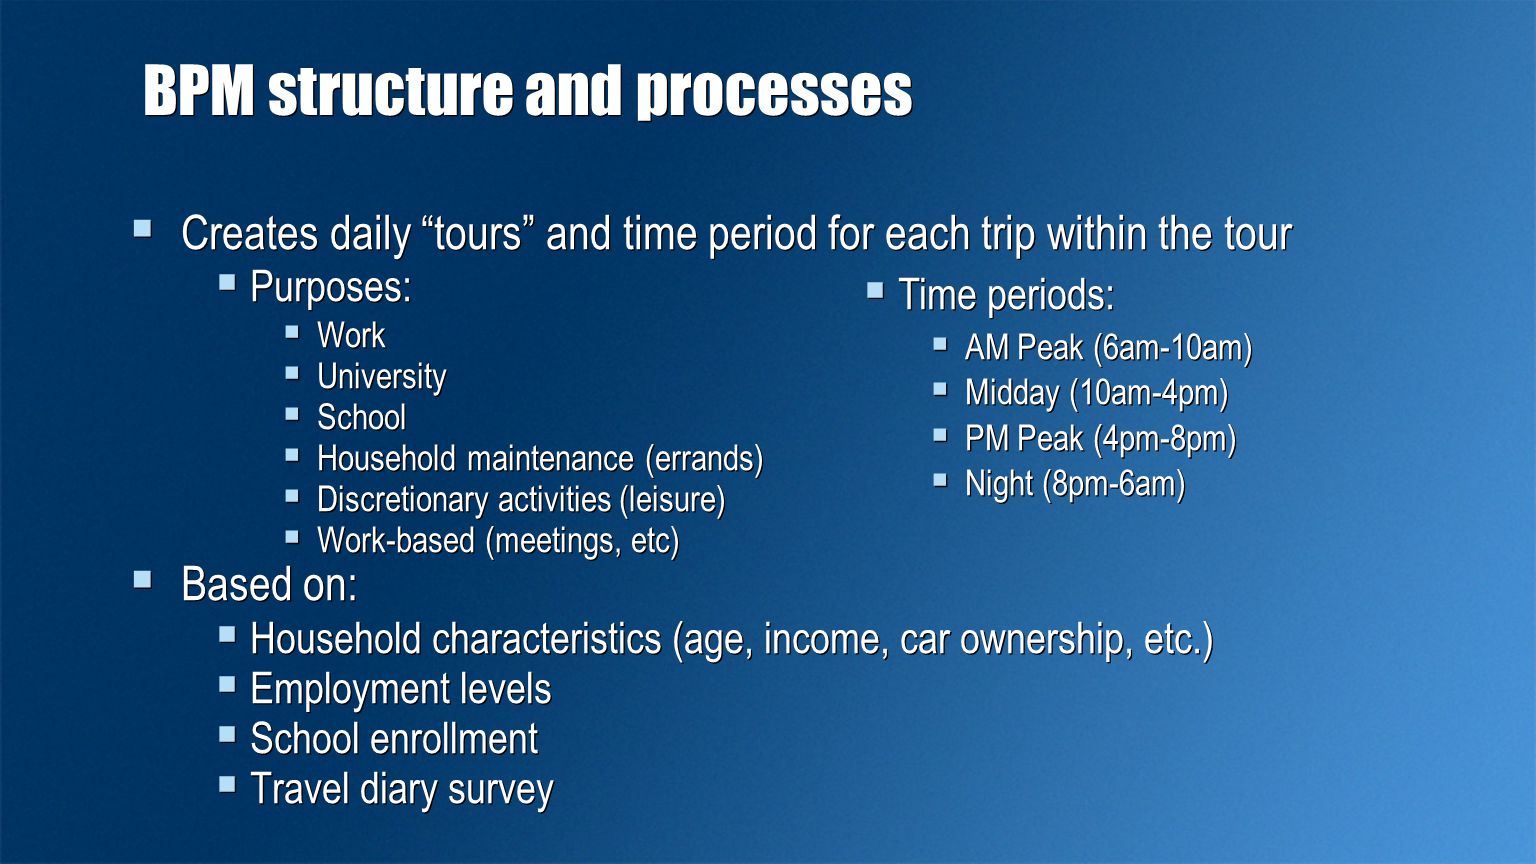 BPM structure and processes  Creates daily tours and time period for each trip within the tour  Purposes:  Work  University  School  Household maintenance (errands)  Discretionary activities (leisure)  Work-based (meetings, etc)  Based on:  Household characteristics (age, income, car ownership, etc.)  Employment levels  School enrollment  Travel diary survey  Creates daily tours and time period for each trip within the tour  Purposes:  Work  University  School  Household maintenance (errands)  Discretionary activities (leisure)  Work-based (meetings, etc)  Based on:  Household characteristics (age, income, car ownership, etc.)  Employment levels  School enrollment  Travel diary survey  Time periods:  AM Peak (6am-10am)  Midday (10am-4pm)  PM Peak (4pm-8pm)  Night (8pm-6am)  Time periods:  AM Peak (6am-10am)  Midday (10am-4pm)  PM Peak (4pm-8pm)  Night (8pm-6am)